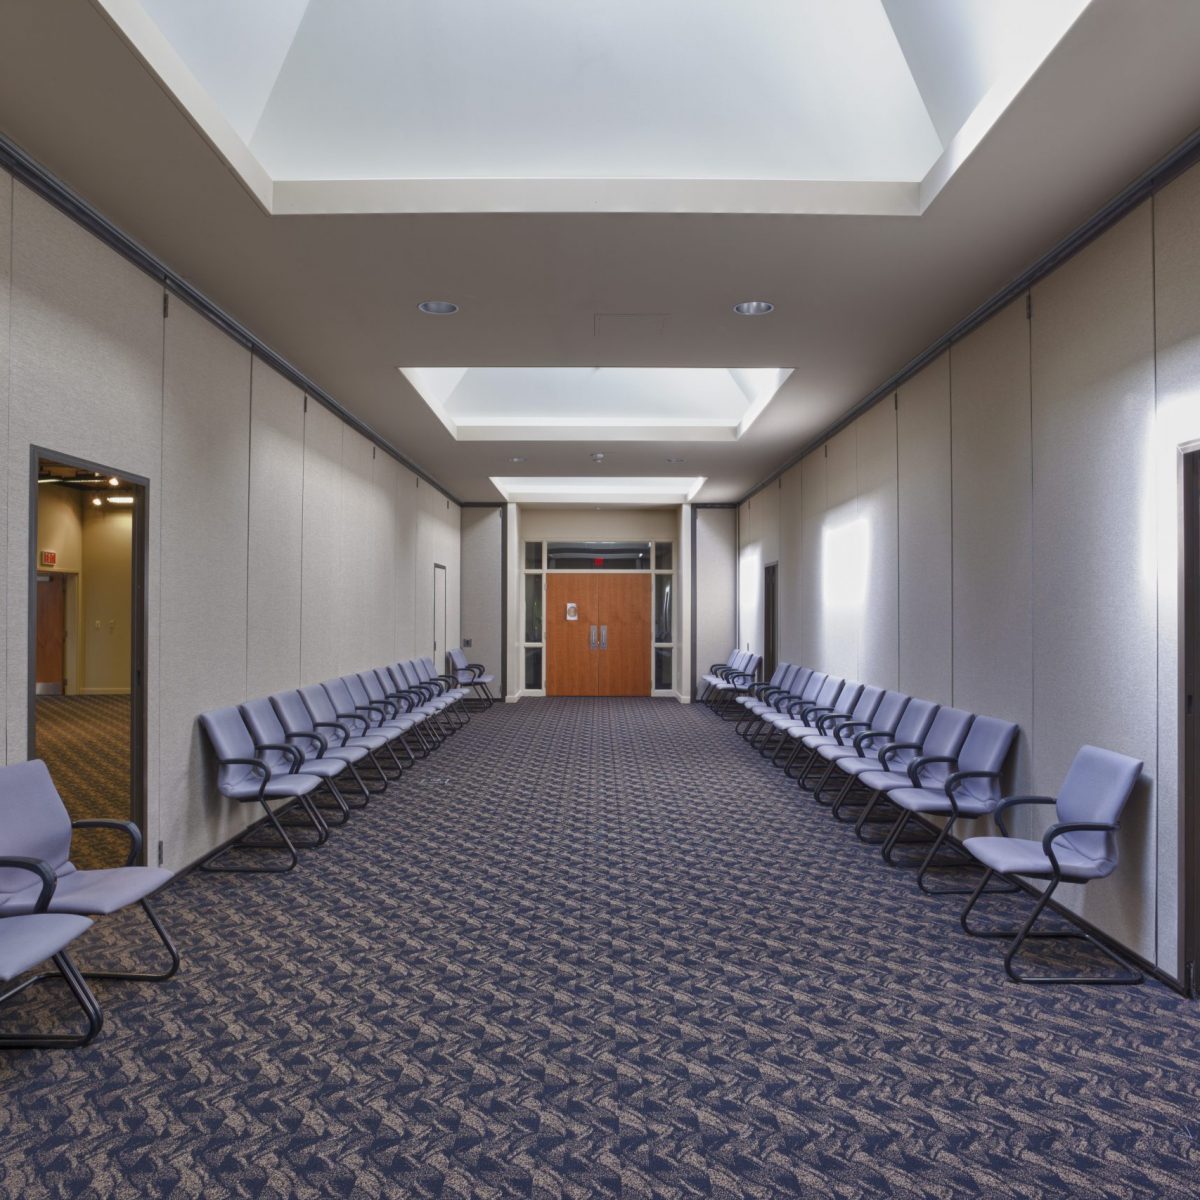 Kwik Wall Operable Partitions